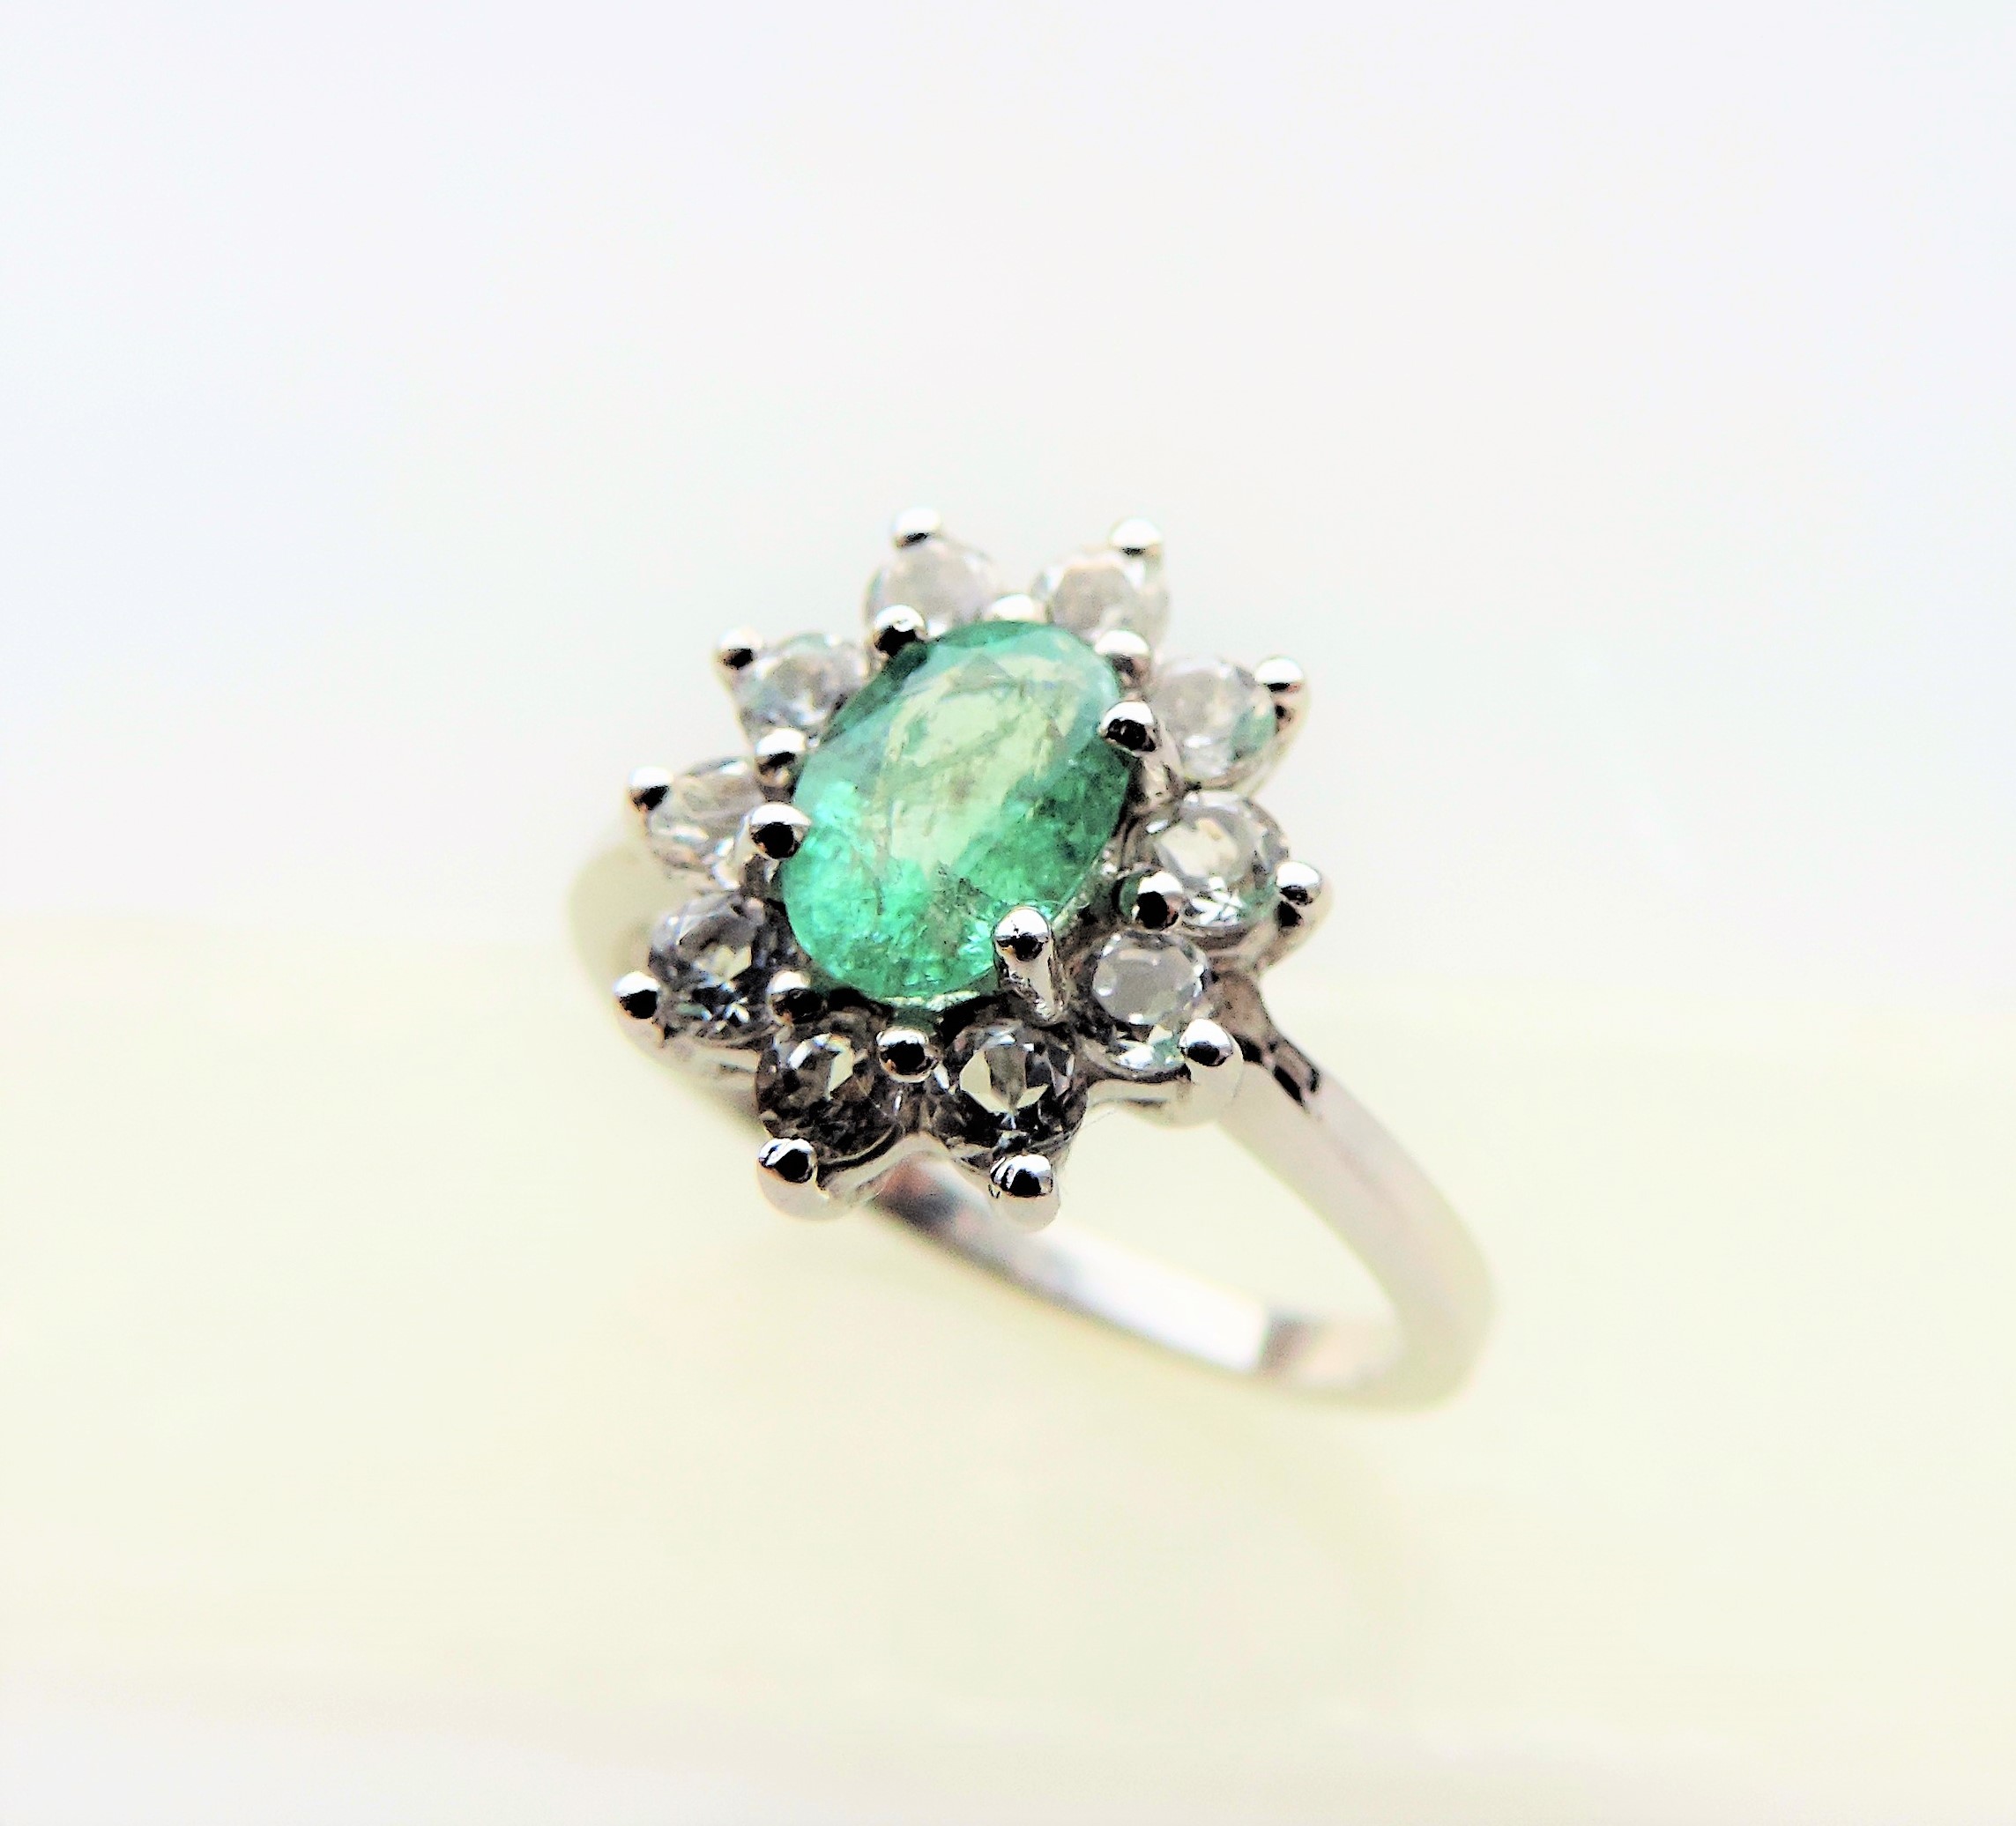 1.5 carat Green and White Topaz Ring - Image 3 of 6